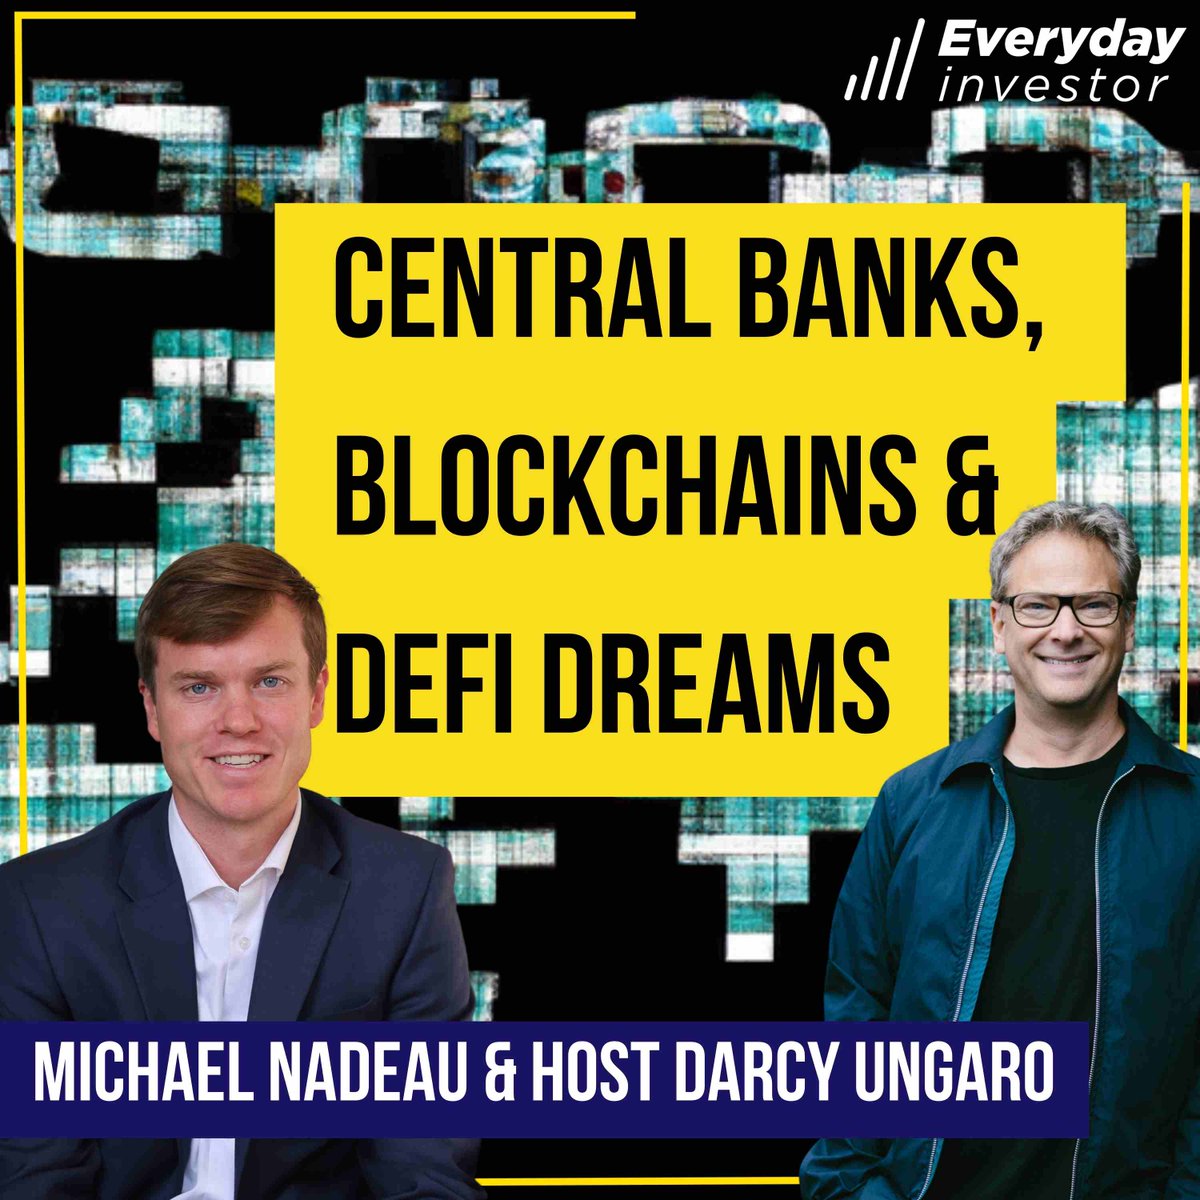 Michael Nadeau of The #DeFi Report joins the conversation on the latest #everydayinvestor.  bit.ly/3EZEDst
#InvestmentRisk #FinancialStrategy #Bitcoin #DeFi #FutureProofYourPortfolio #podcast